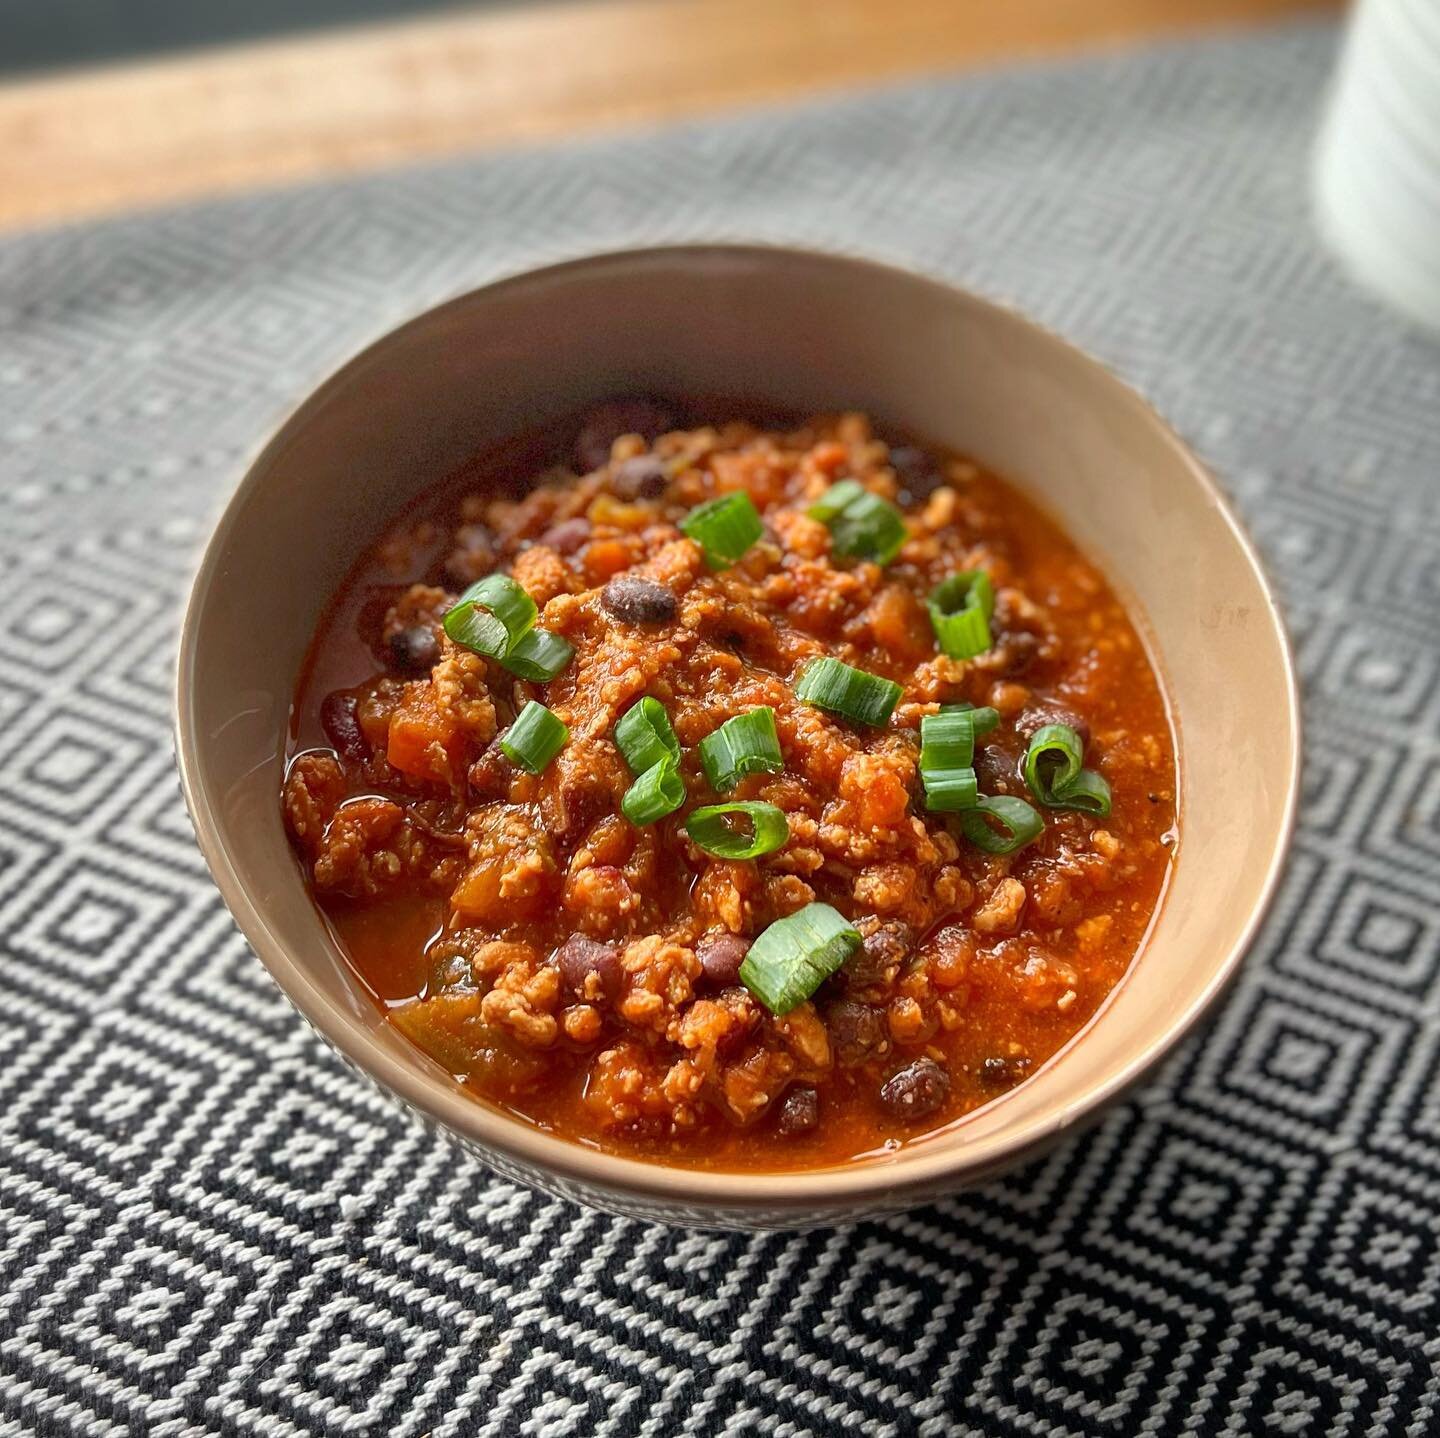 Homestyle Turkey Chili on a snowy day. Hits the spot.

.
.
.
. 
#instafood #yum #yummy #yumyum #homemade #eat #eatbetter #food #foodporn #stuffed #hot #beautiful #turkey #love #sharefood #chili #delicious #eating #foodpic #foodpics #cooking #hungry #